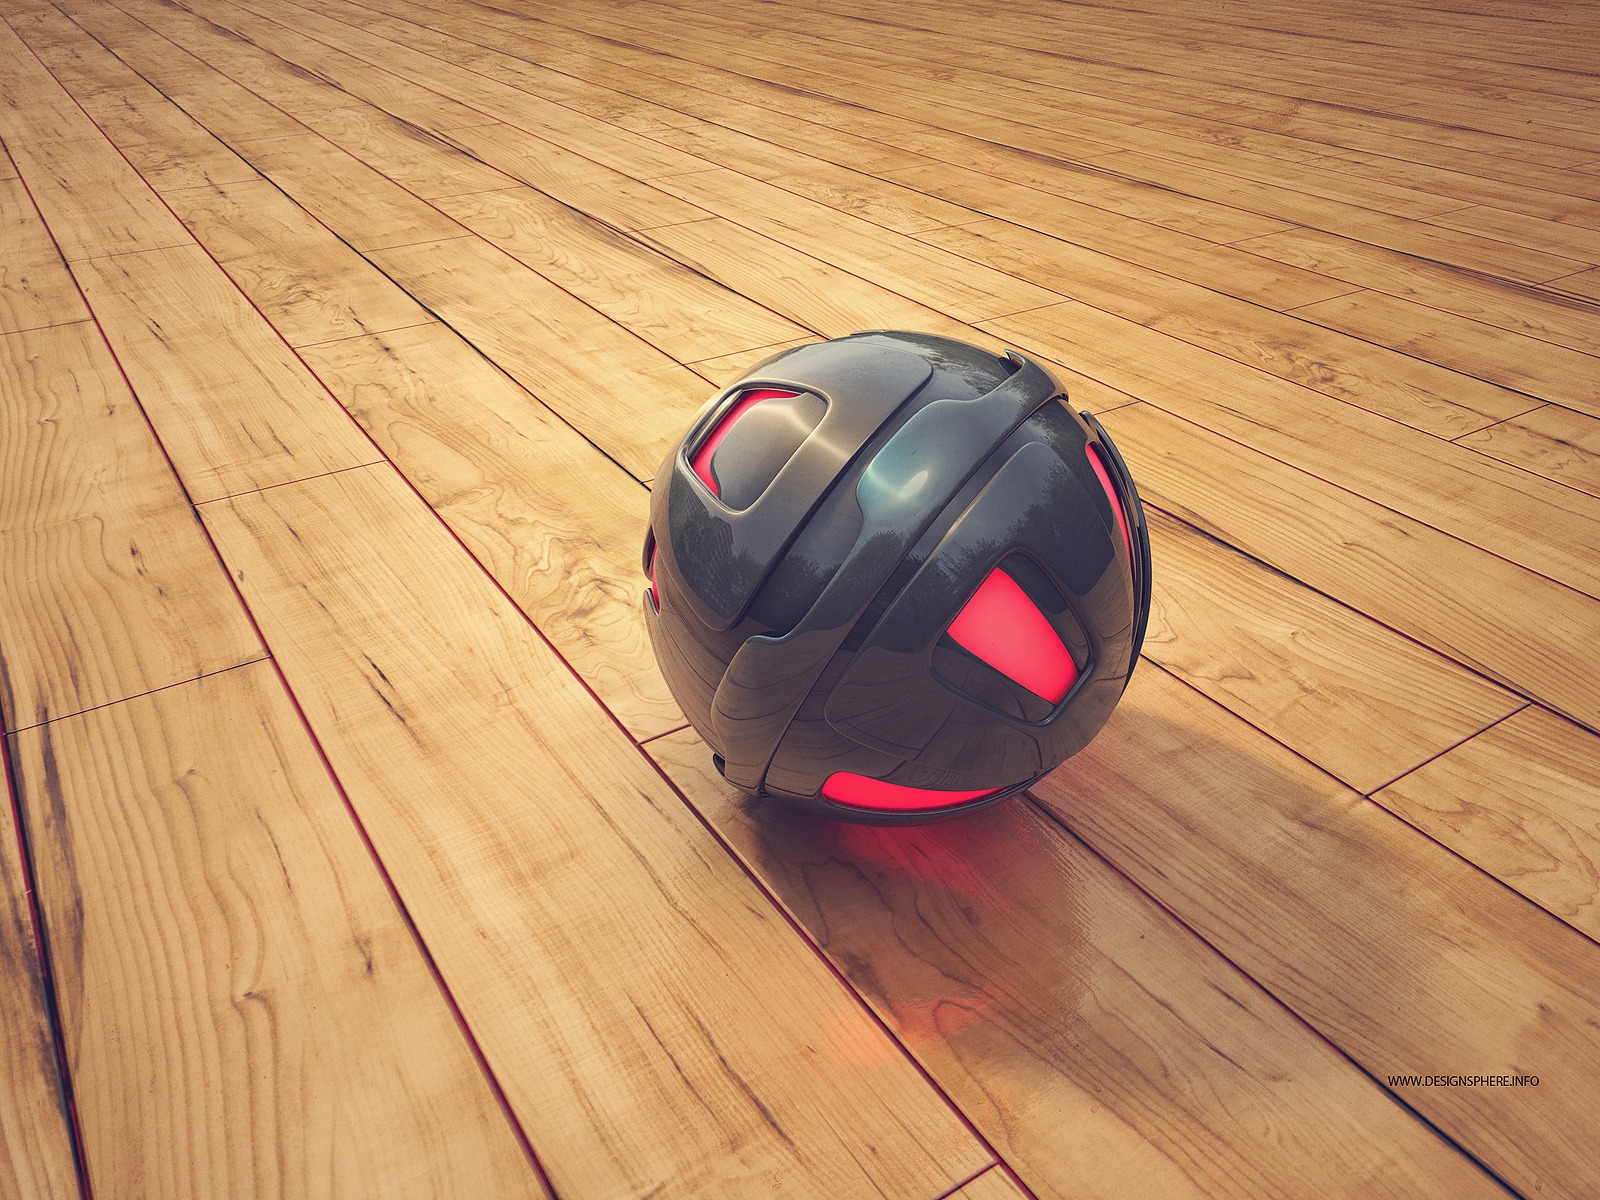 Sphere for 1600 x 1200 resolution